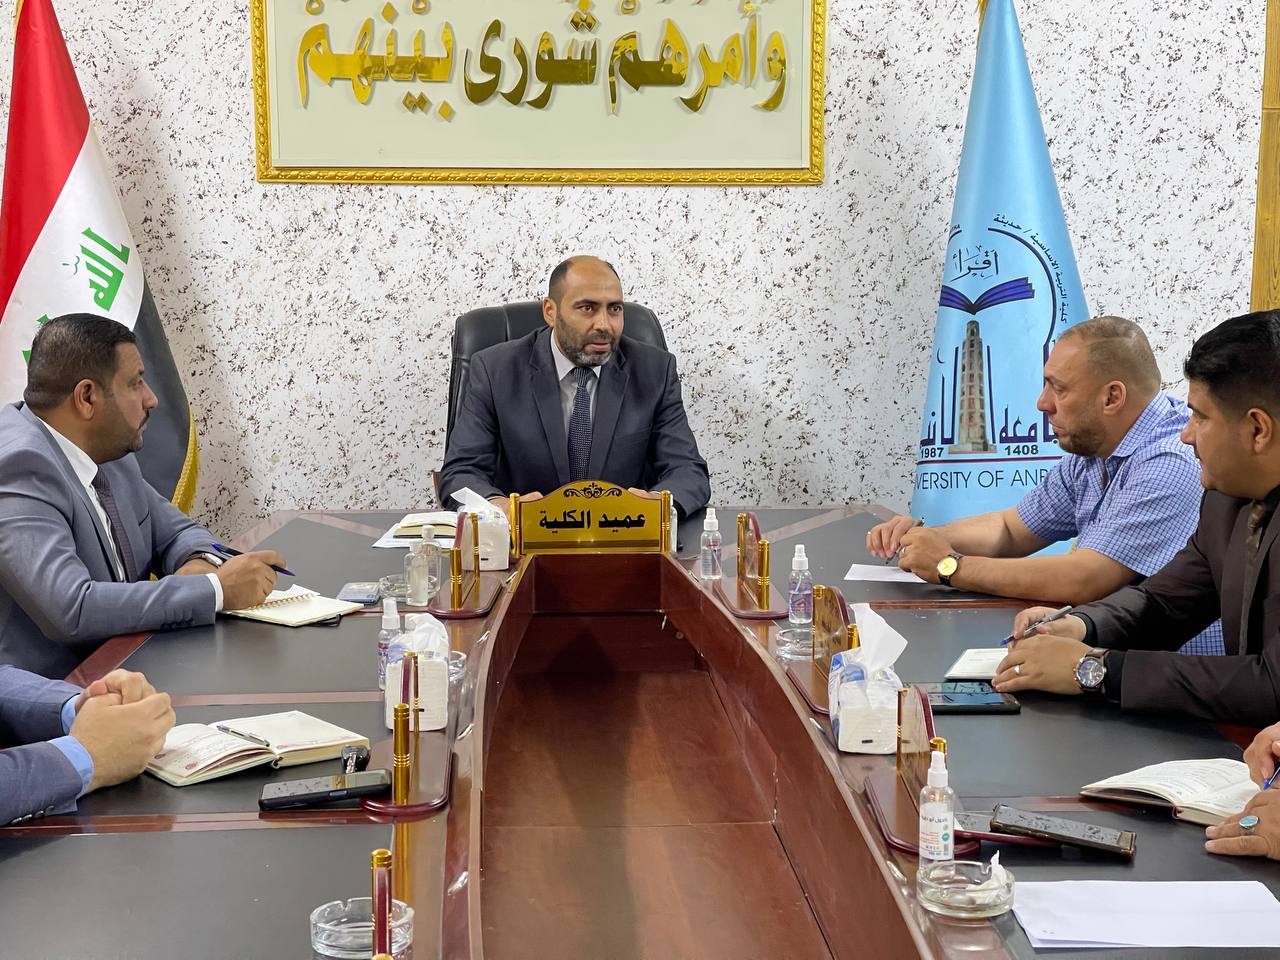 The Council of the College of Basic Education / Haditha  holds its sixth regular session for the academic year 2021-2022